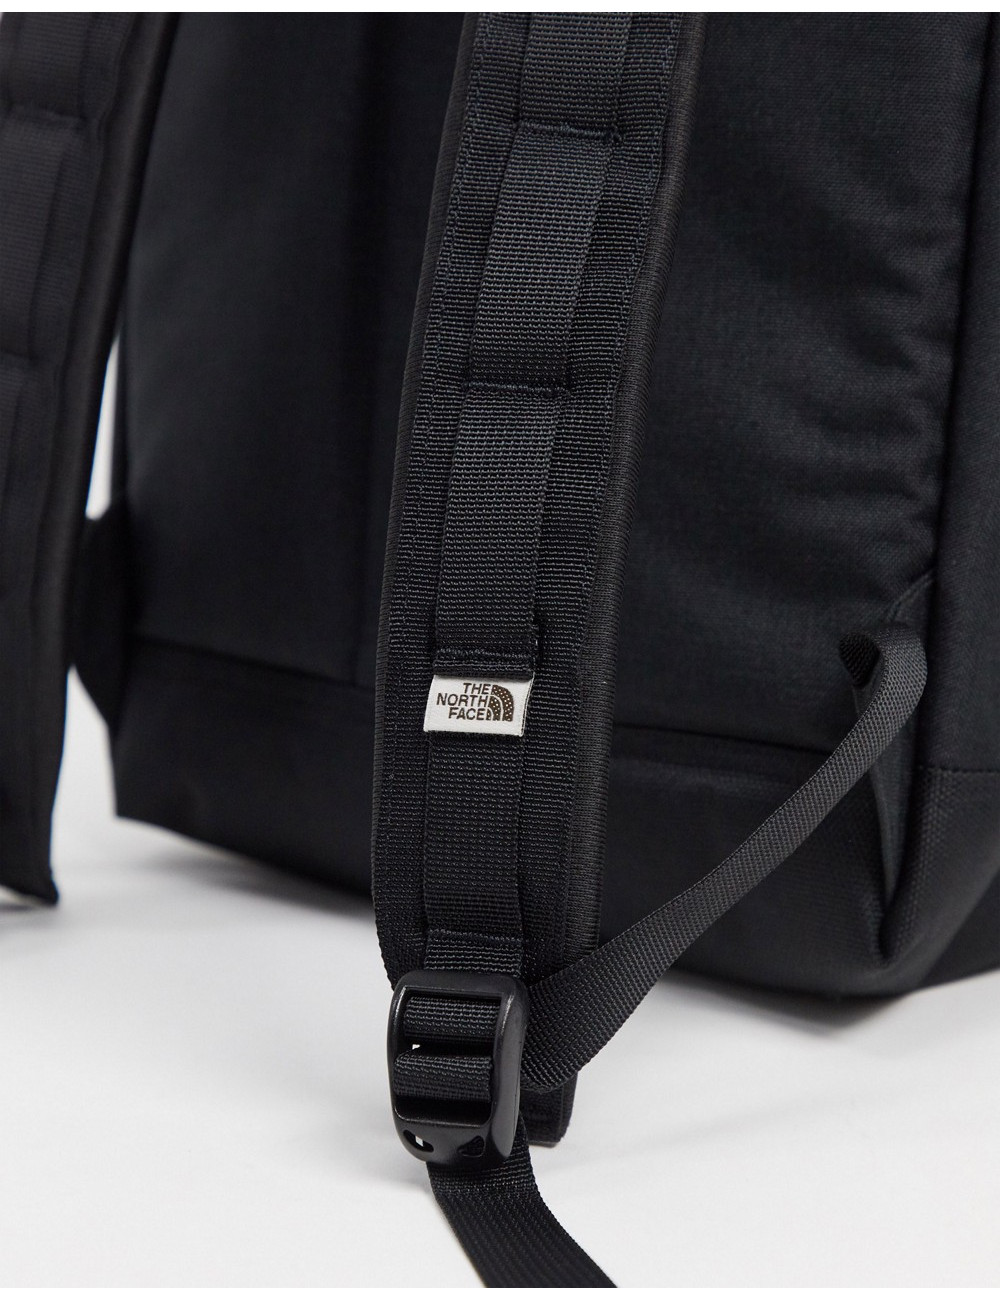 The North Face Tote...